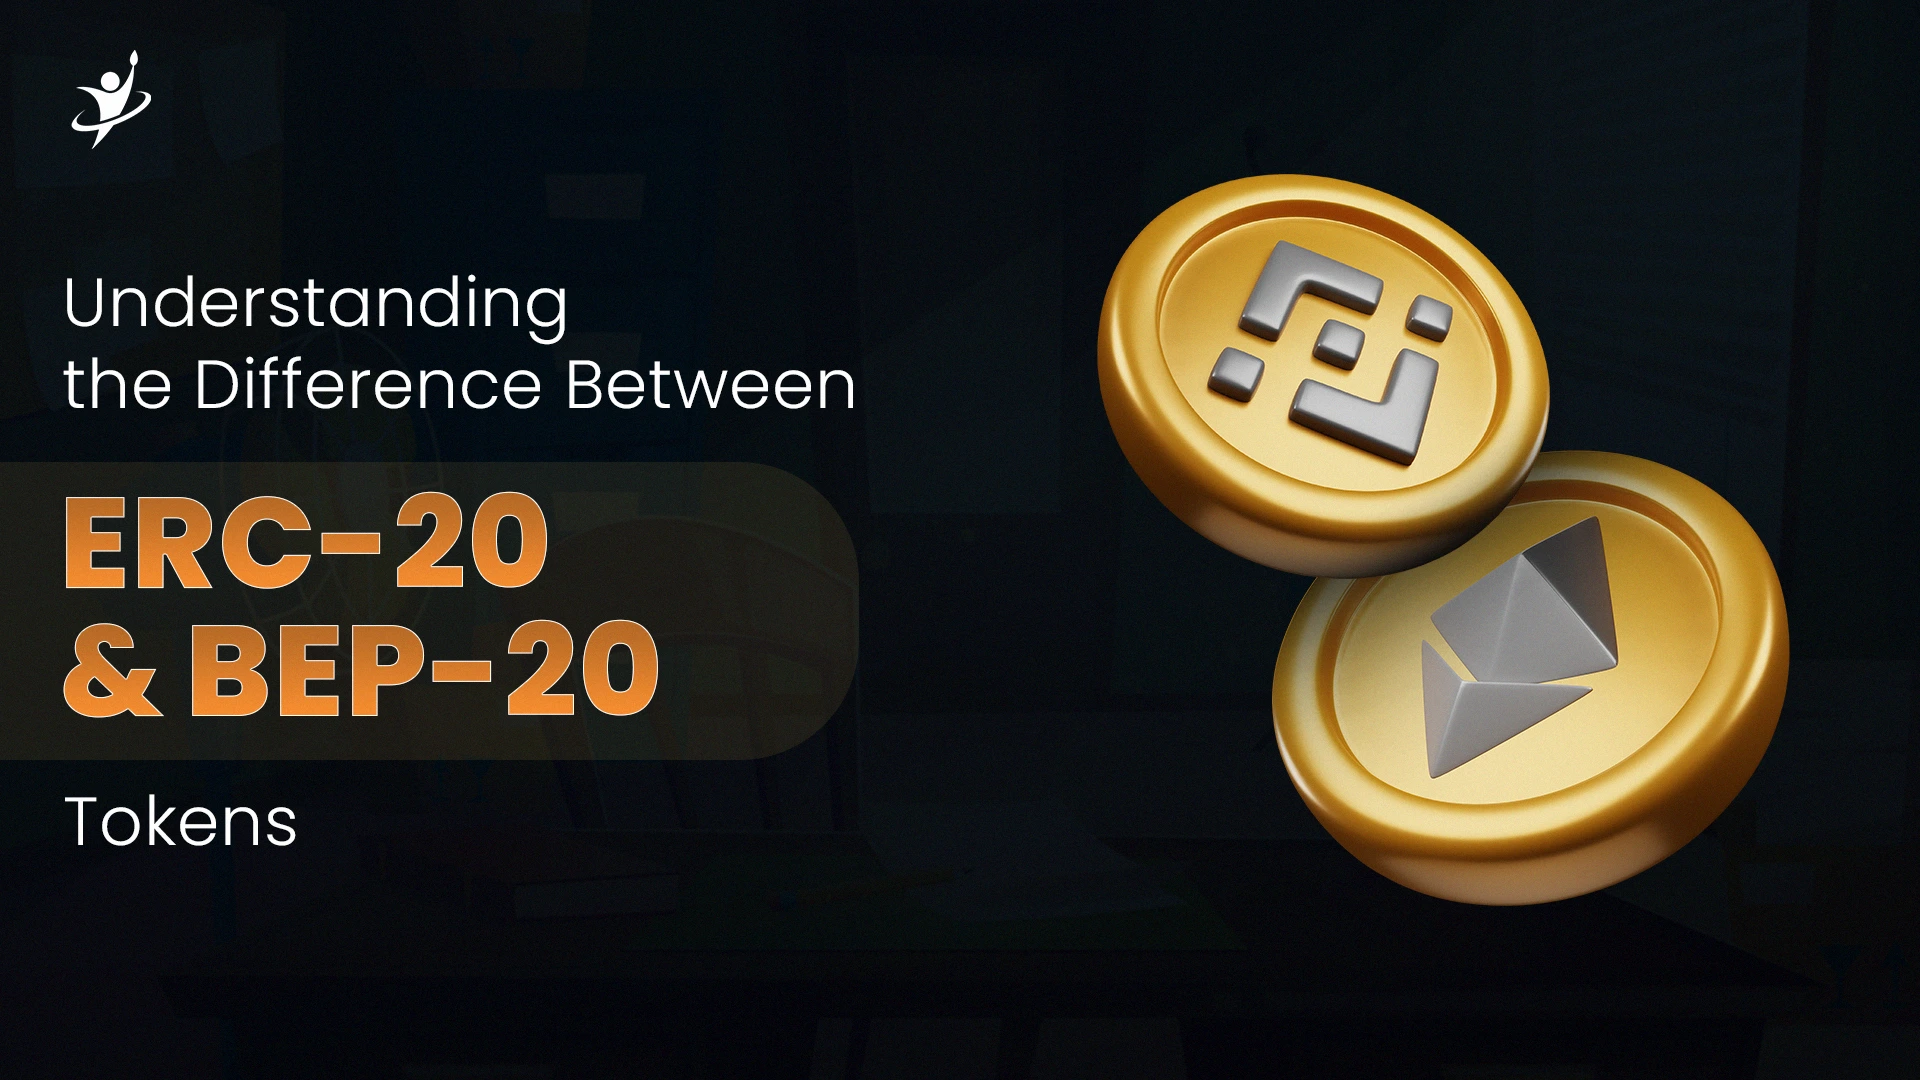 Understanding the Difference Between ERC-20 and BEP-20 Tokens